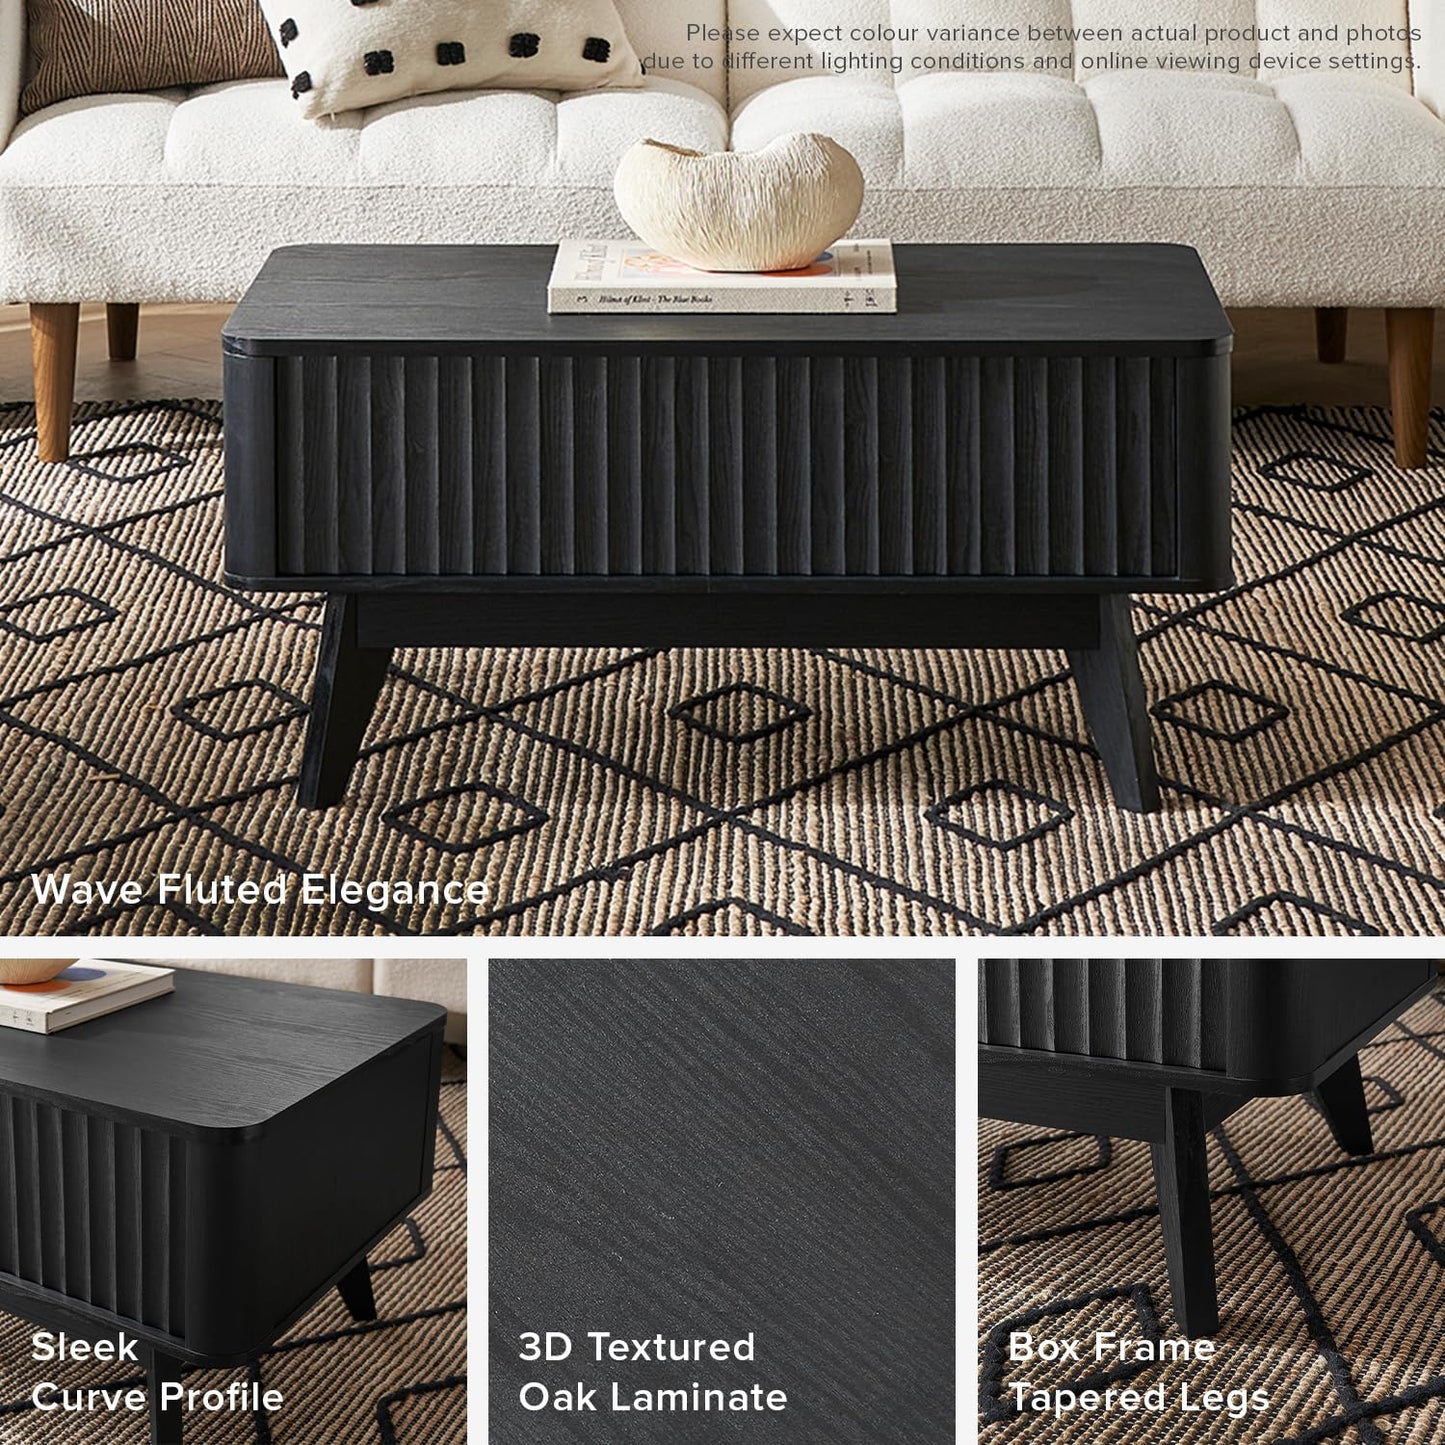 mopio Brooklyn Coffee Table, Lift Top Coffee Tables for Living Room, Mid Century, Modern Farmhouse Center Table with Lifting Top & Hidden Storage, Fluted Panel, Rising Pull Up Dining Table, Black